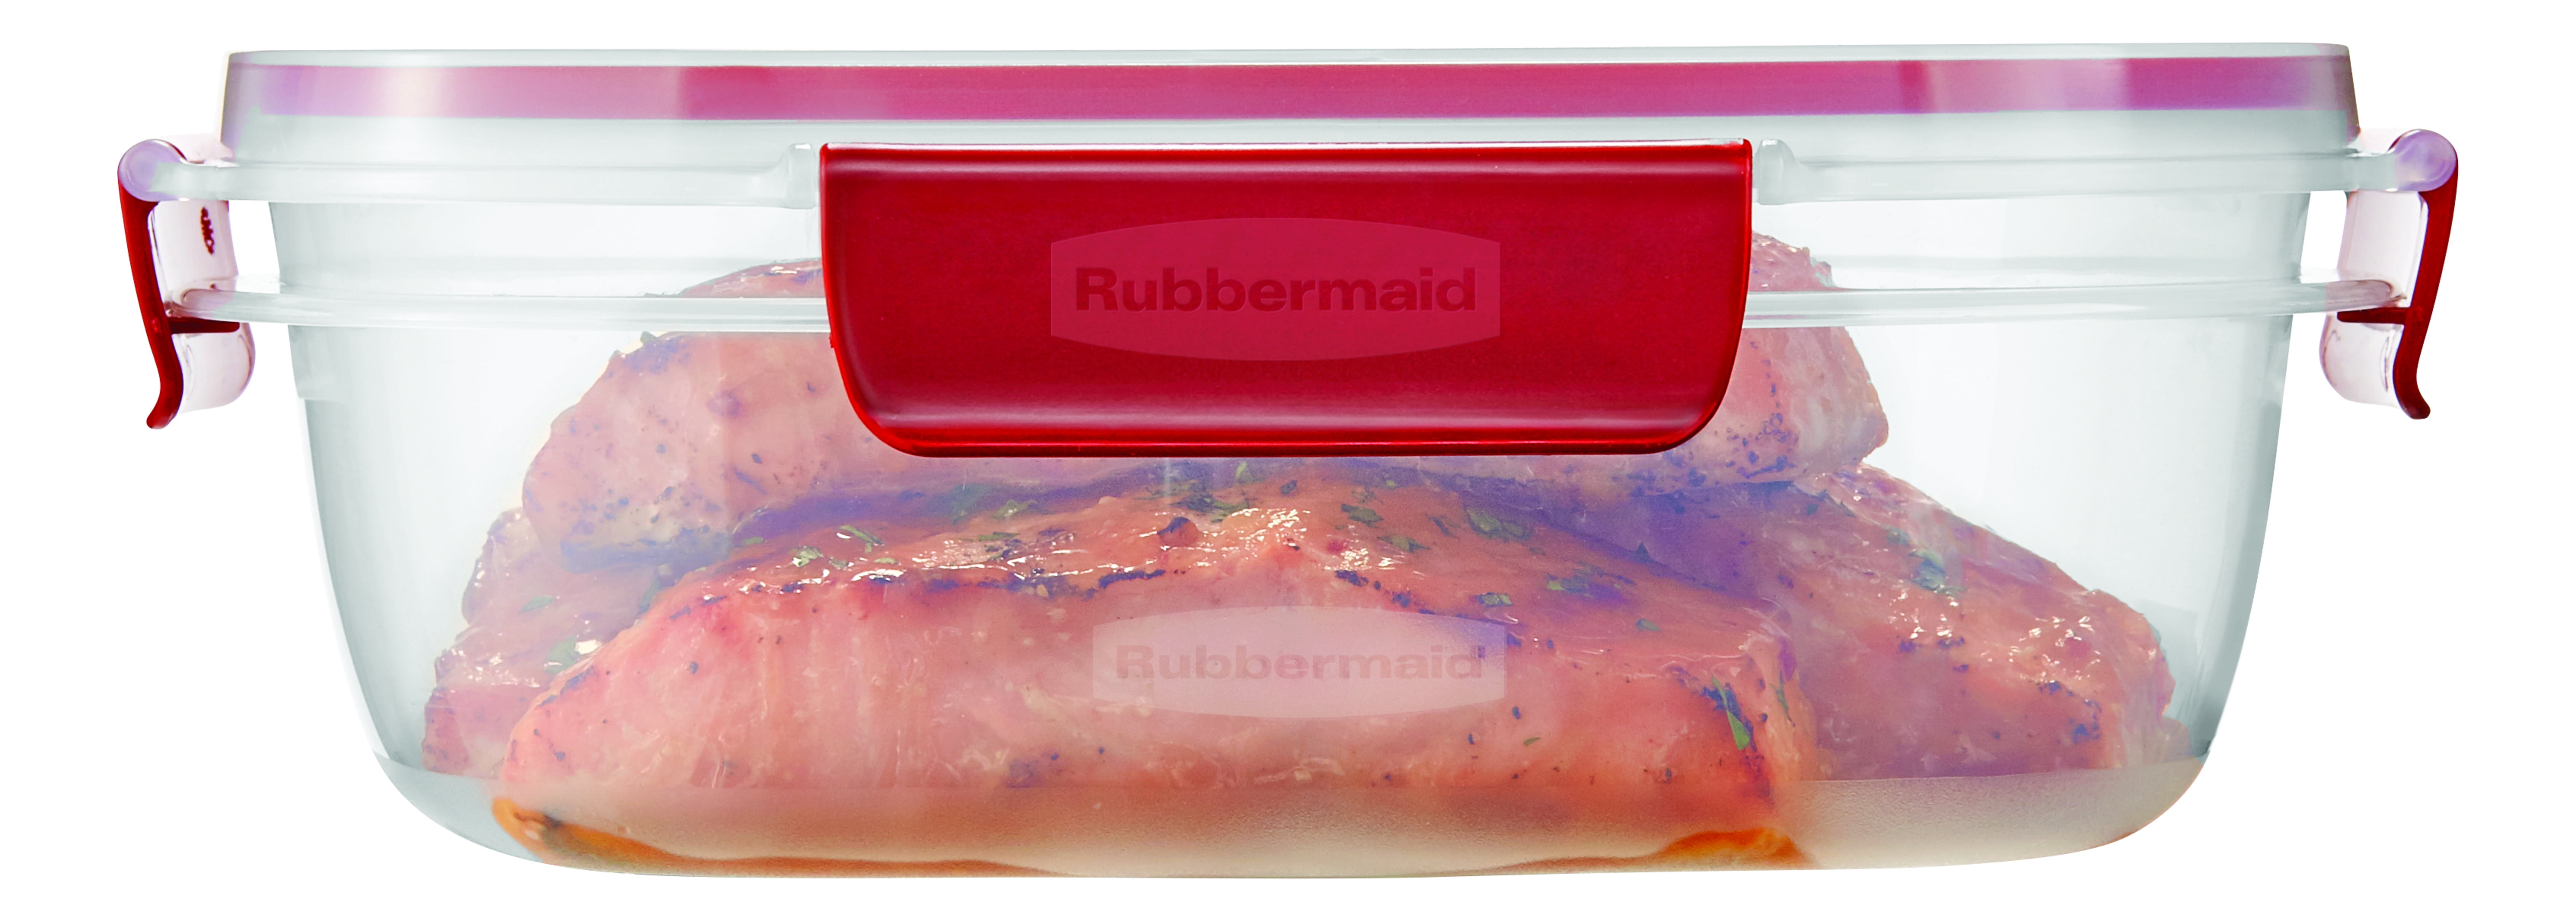 Rubbermaid Easy Find Lids Tabs 9 Cup